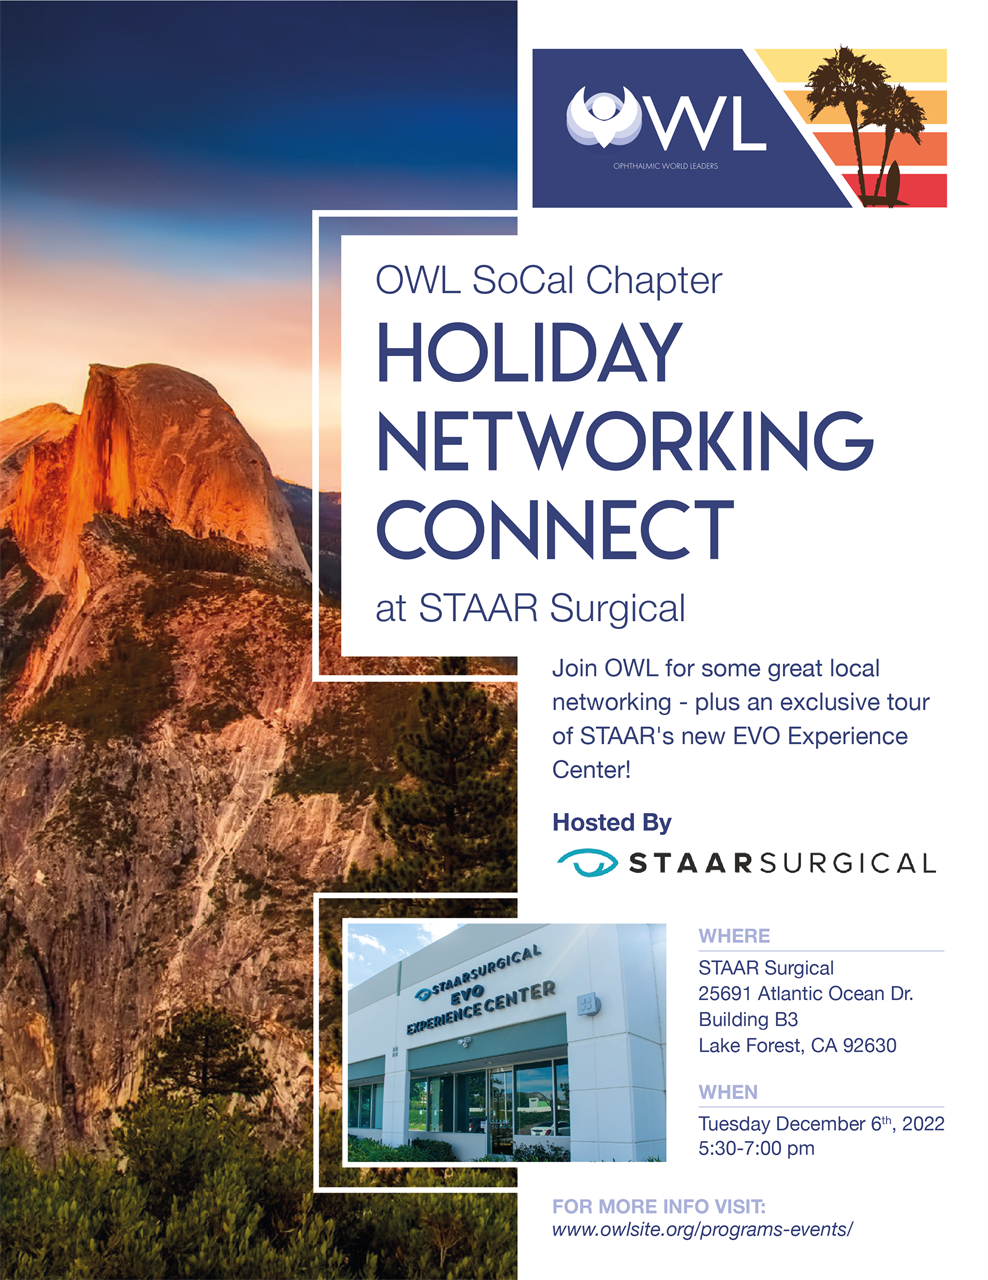 OWL SoCal Chapter Holiday Networking Connect (Hosted by STAAR Surgical) Date/time: Tues, Dec. 6th; 5:30-7 PM PT; Location: STAAR Surgical, 25691 Atlantic Ocean Dr. Building B3, Lake Forest, CA 92630 | Join OWL for some great local networking - plus an exclusive tour of STAAR's new EVO Experience Center!